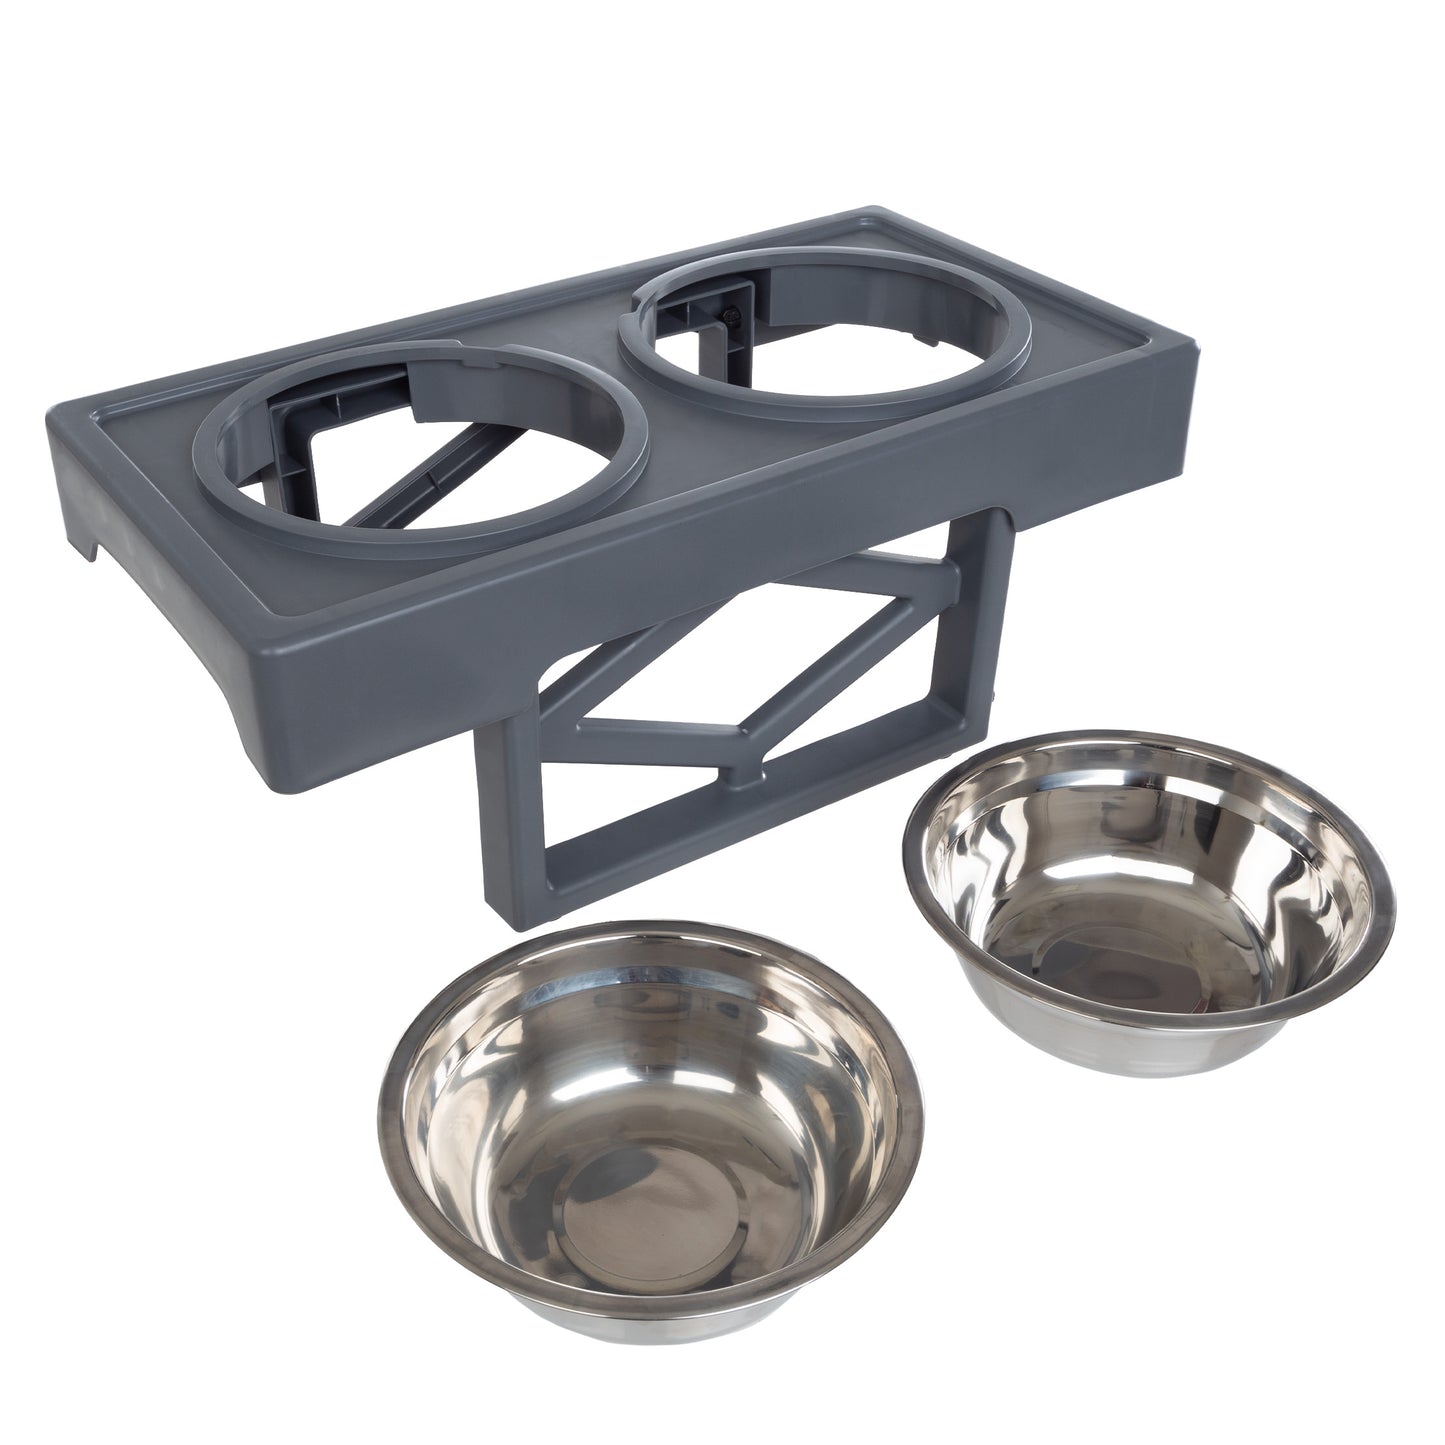 2 Dog Bowls with Adjustable Stand